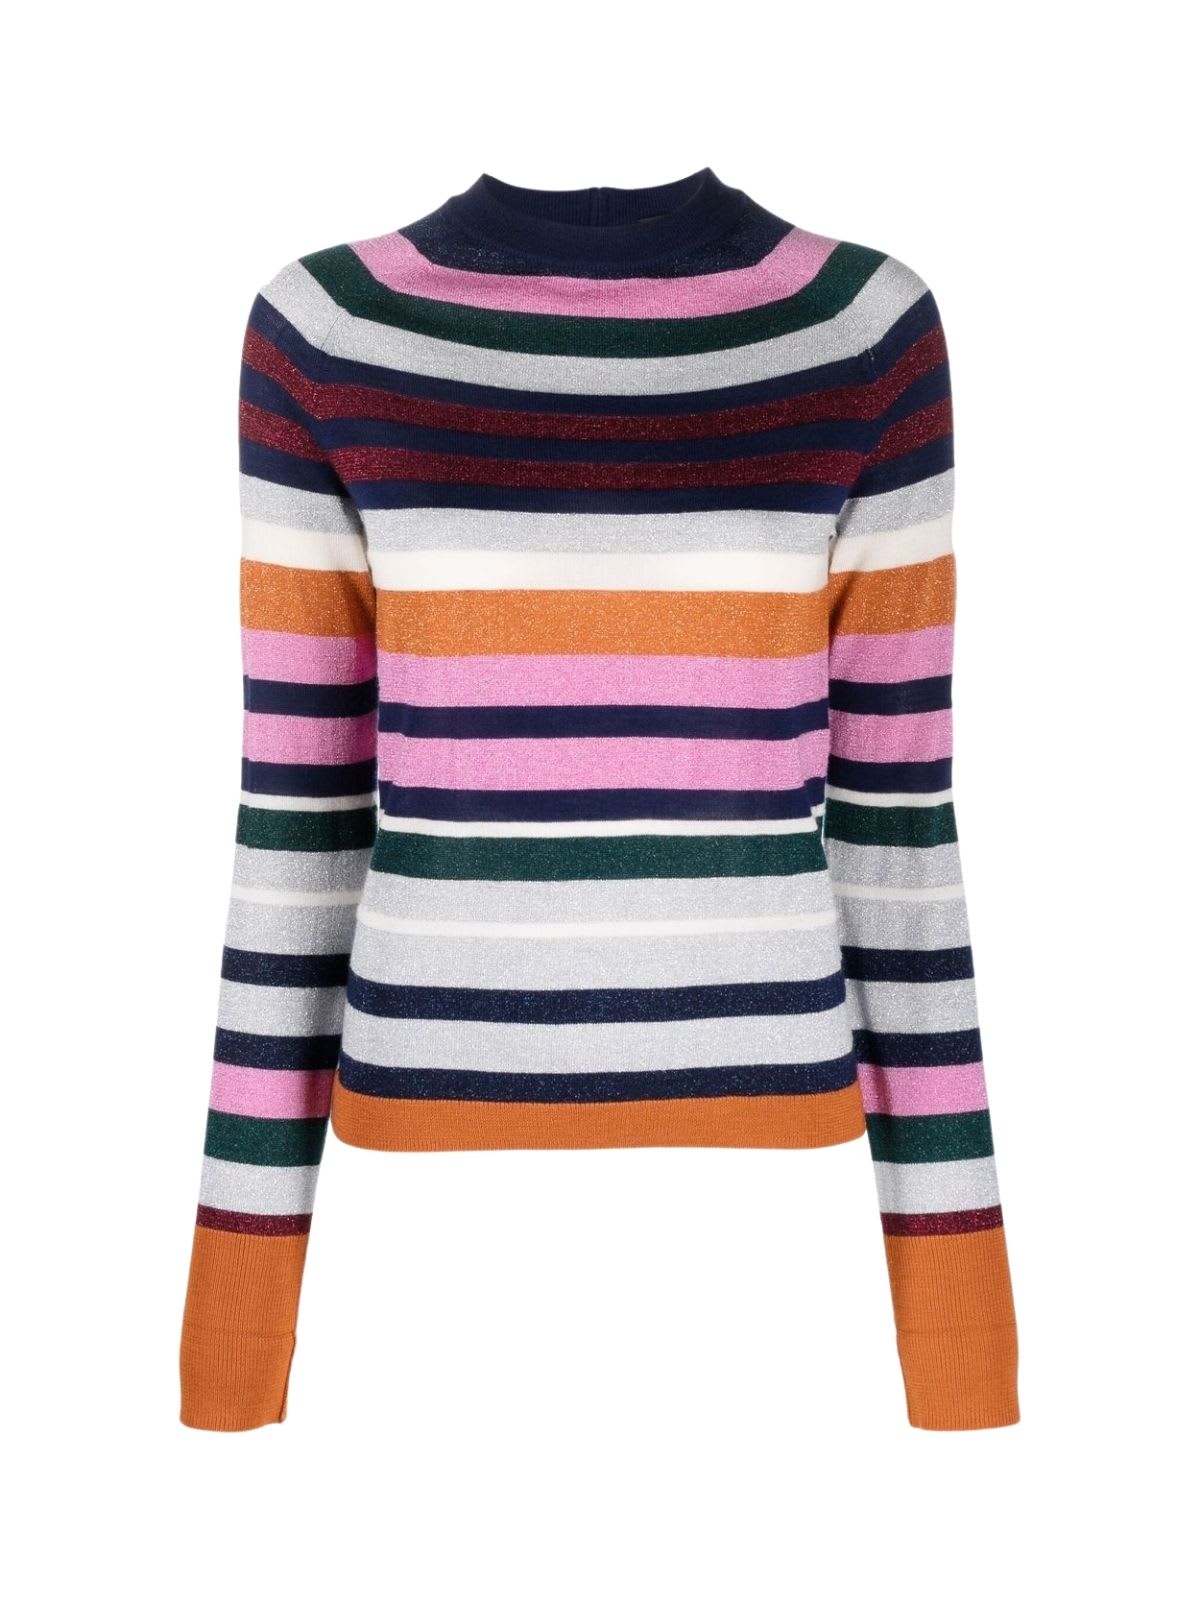 PS by Paul Smith Striped Crew Neck Sweater W/zip On Back